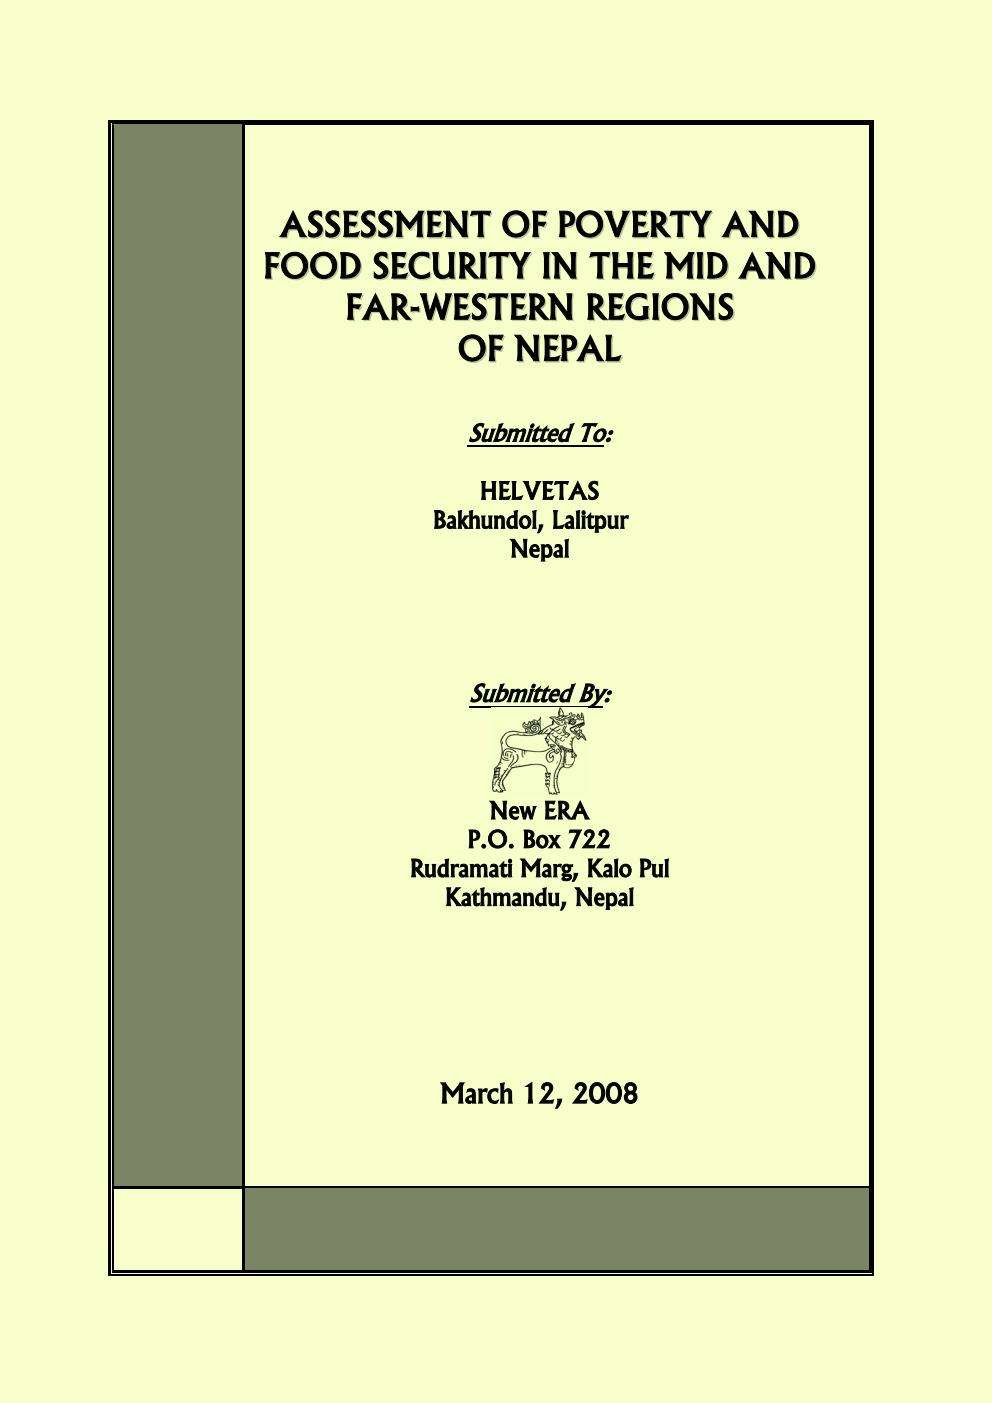 Assessment of Poverty and Food Security in the Mid and Far-Western Regions of Nepal